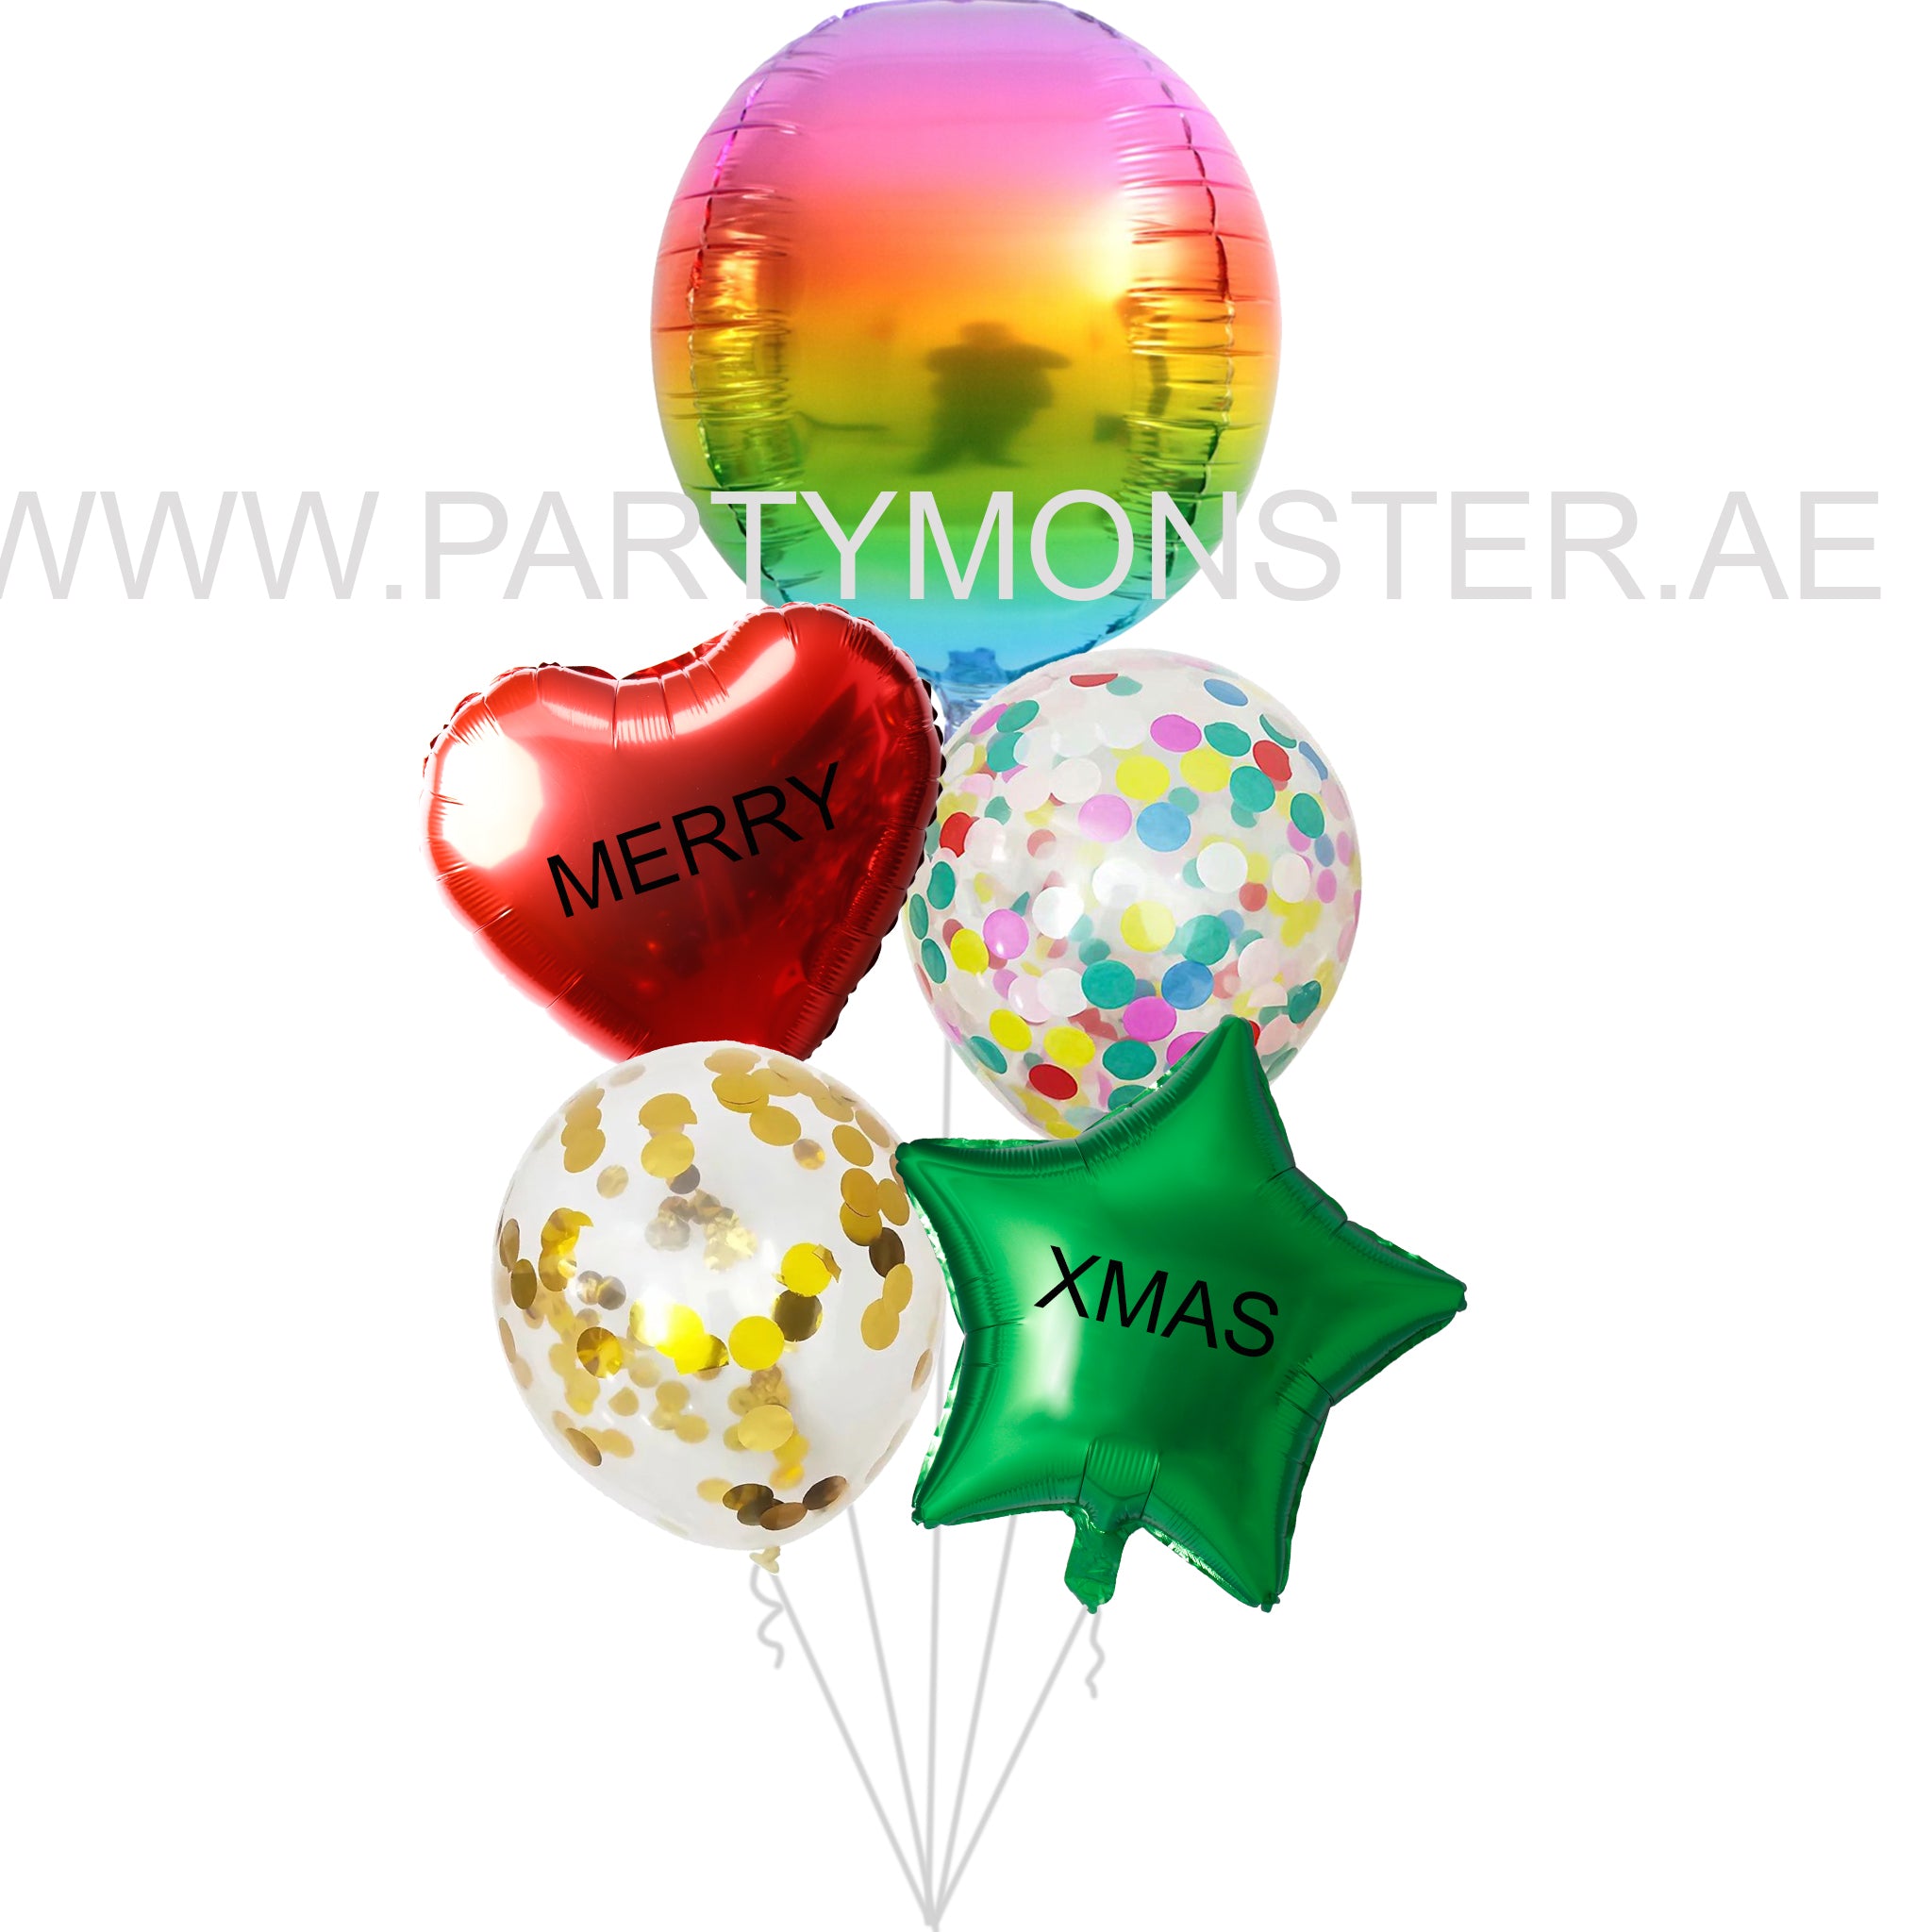 Merry Christmas Customized Balloons Bouquet for sale online delivery in Dubai